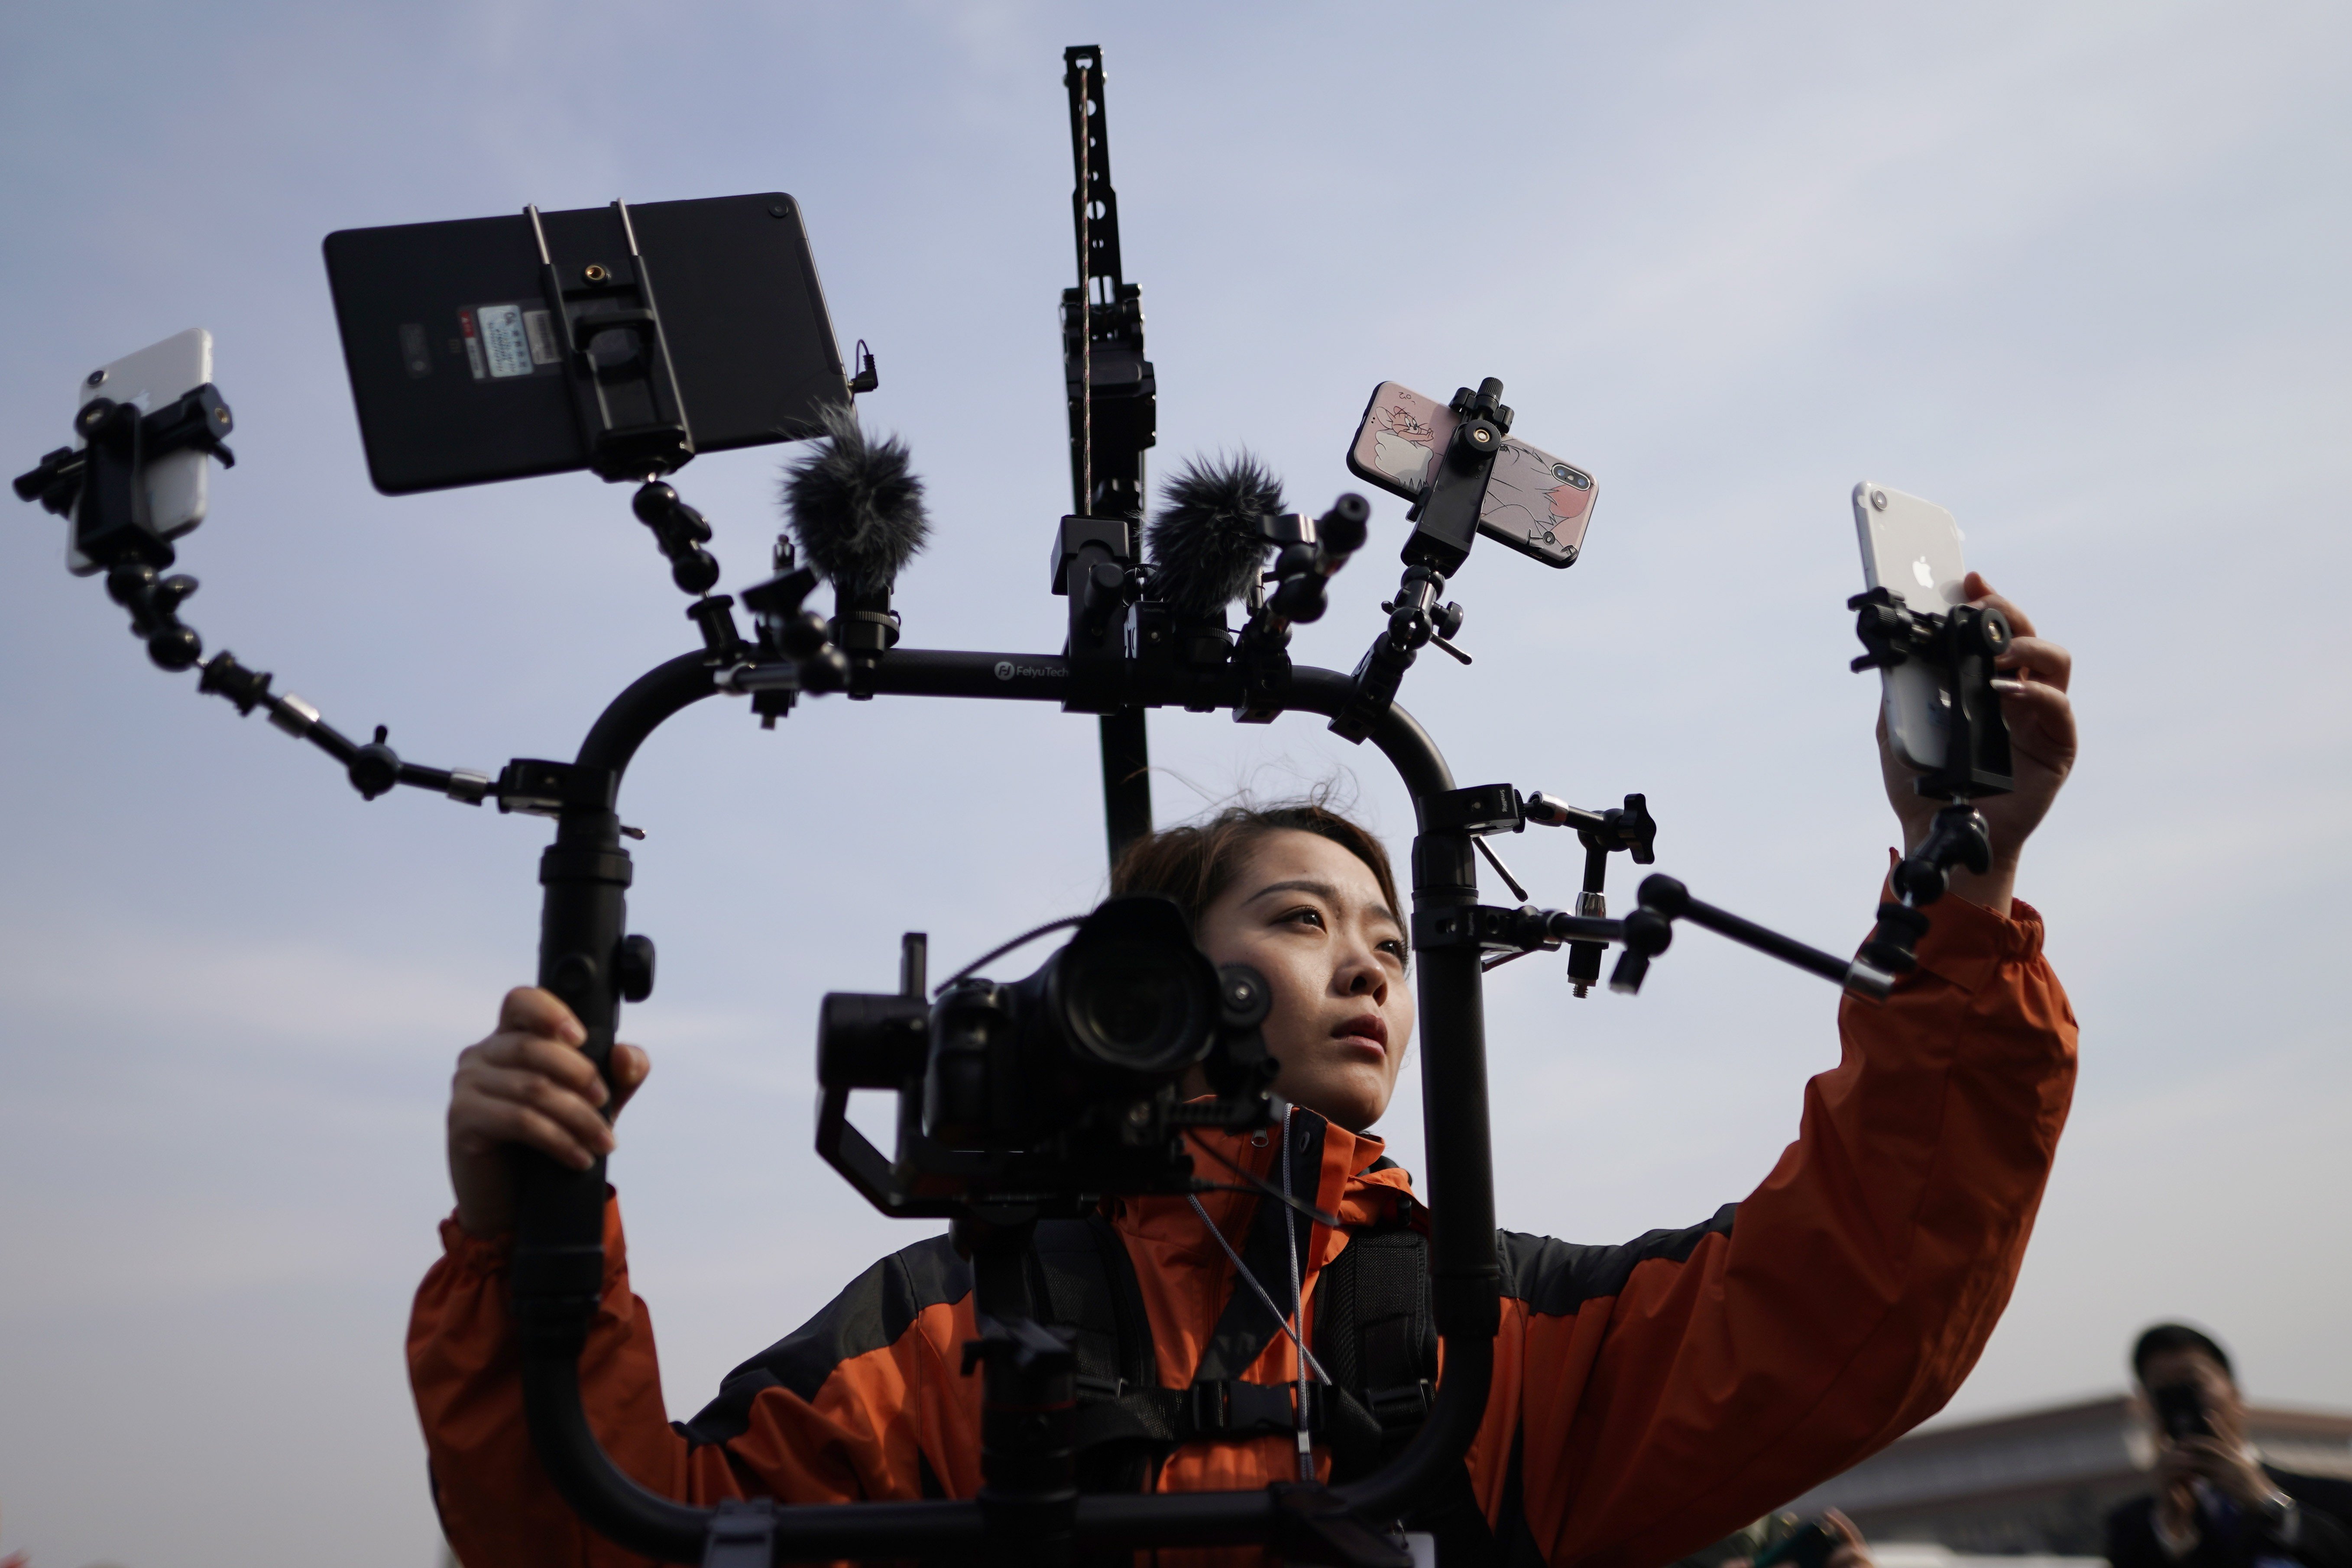 A reporter uses mobile phones for a live broadcast of the National People’s Congress meeting at the Great Hall of the People in Beijing, on March 8. The consumption-focused innovative industries that barely existed in 2008 are increasingly propelling the Chinese economy today. Photo: EPA-EFE